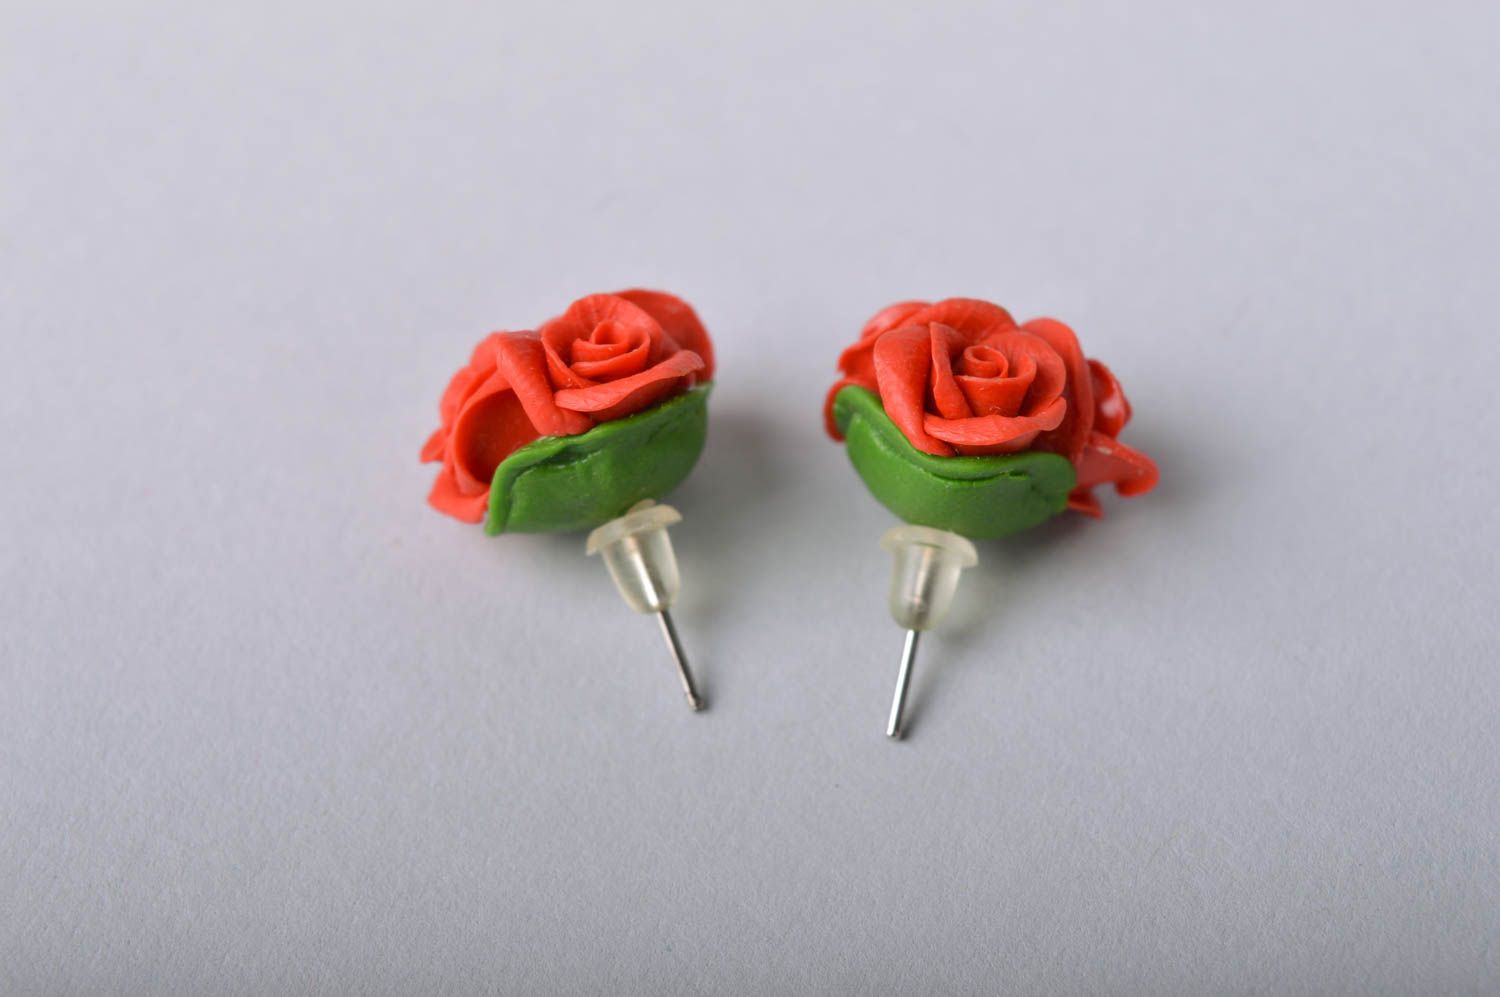 Handmade flower stud earrings made of cold porcelain in shape of red roses photo 3